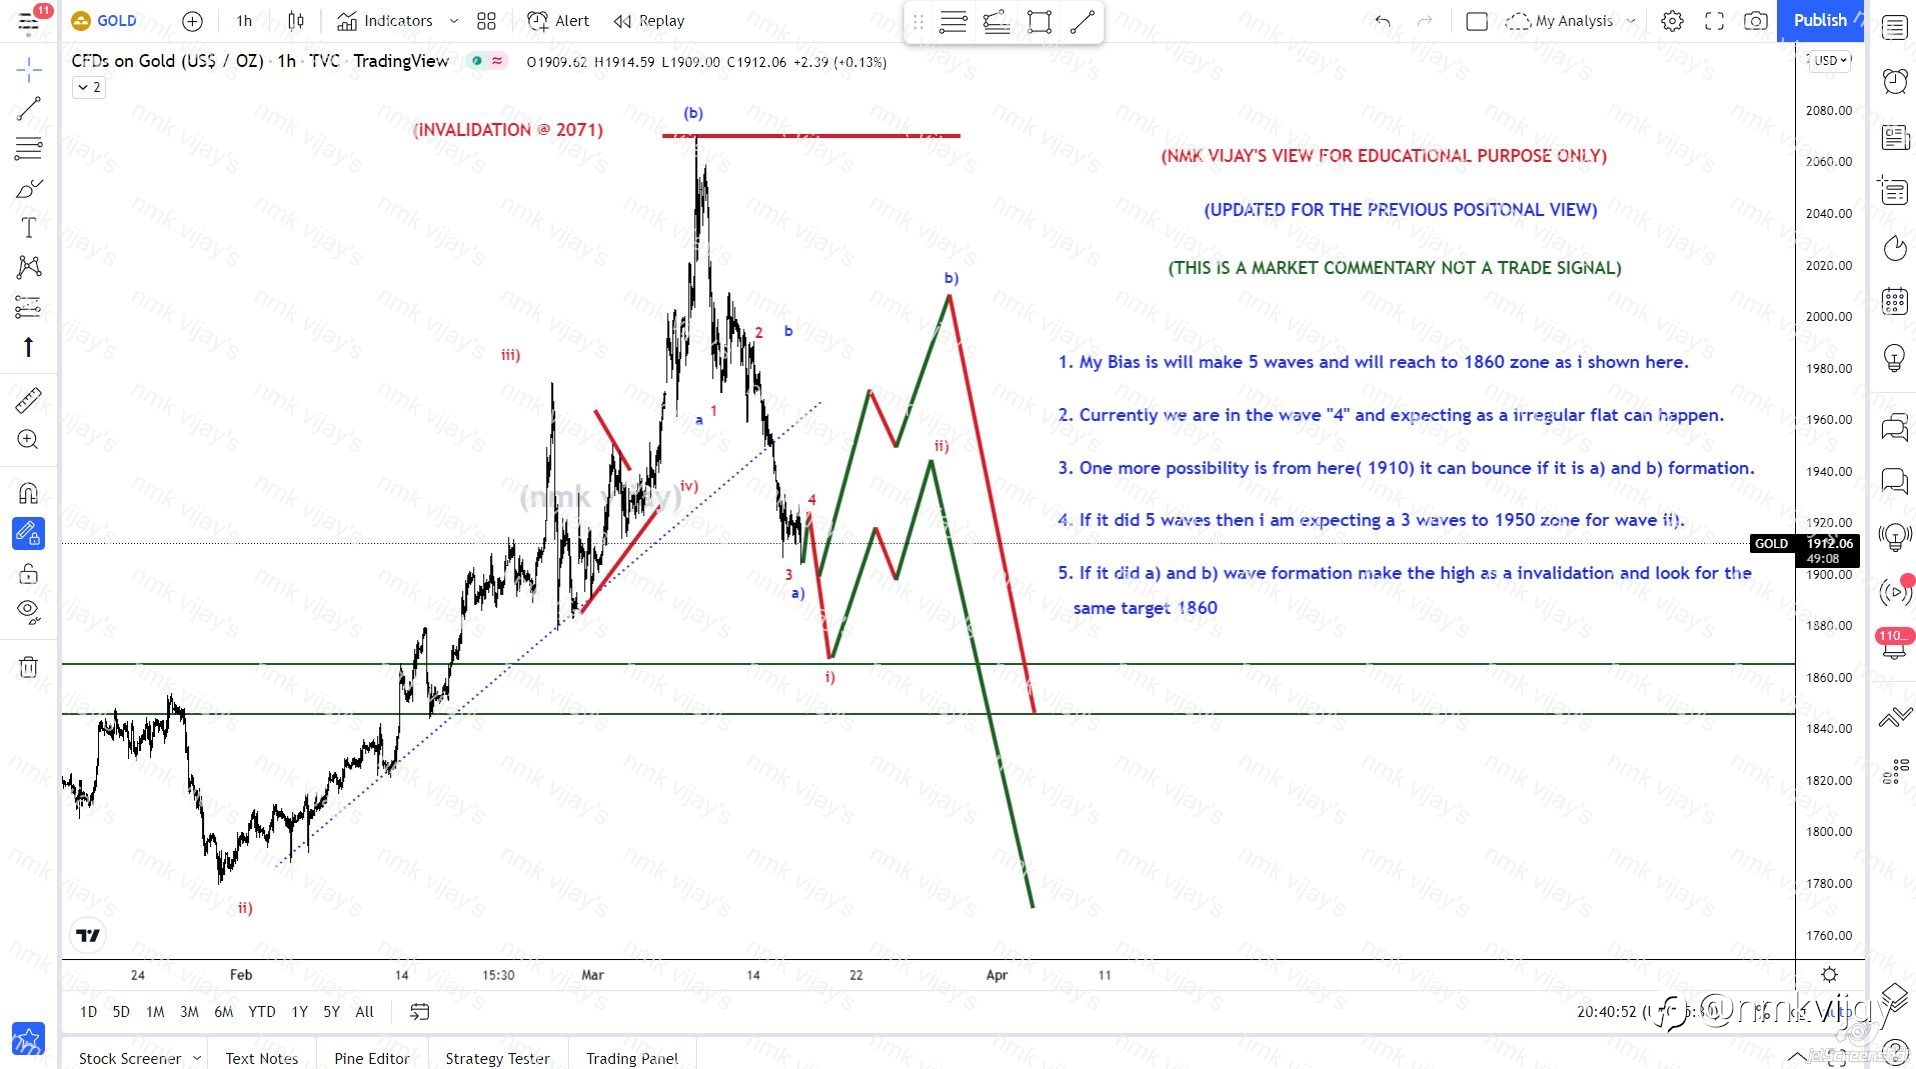 GOLD-Will make 5 waves impulse in bearish to 1860 or will make 3 waves for b wave ?